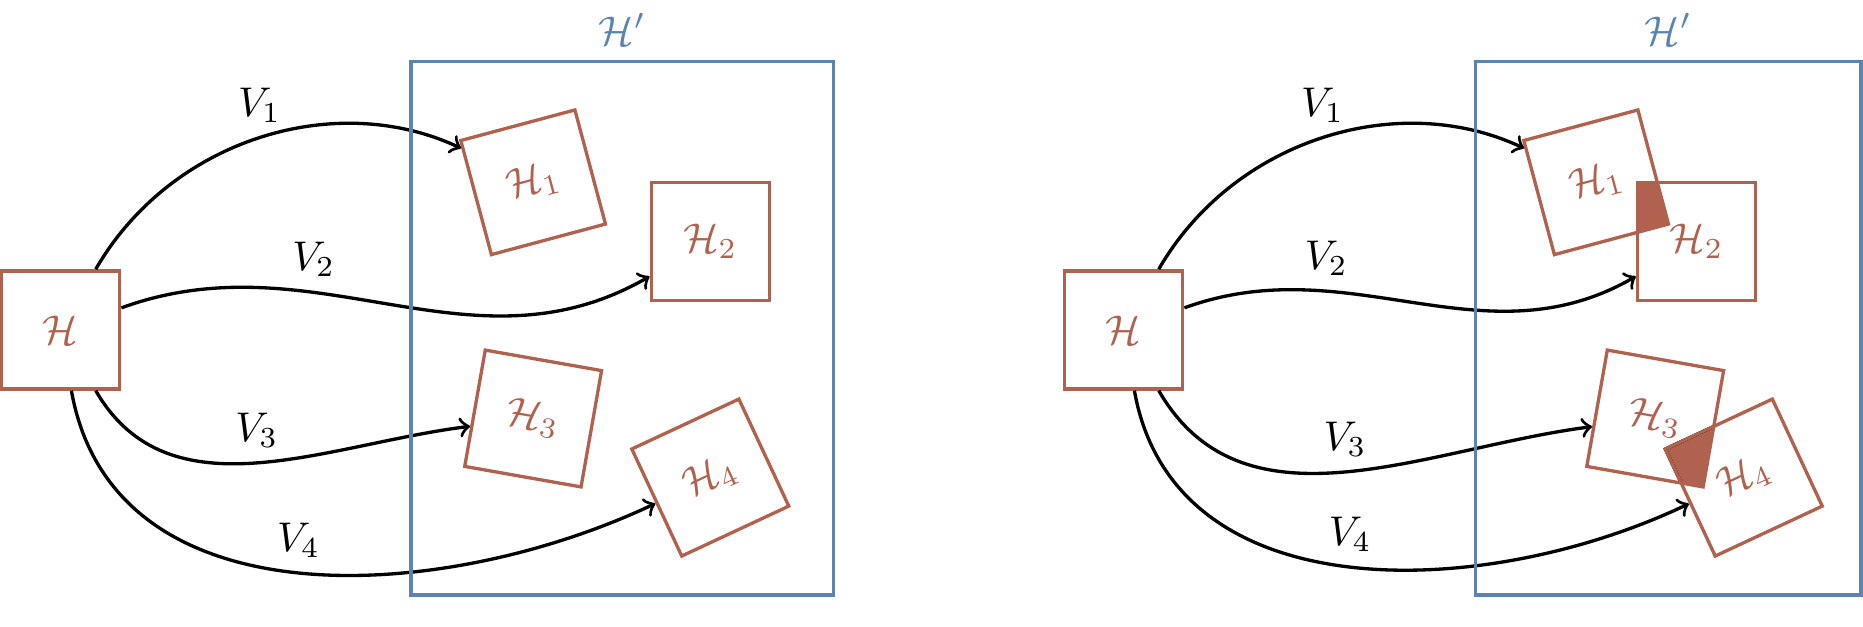 A visualisation of correctable (left) and non-correctable (right) channels. Each isometry V_i, which is chosen with some probability p_i, maps the original space to a different space. If those spaces do not overlap, we can detect which one we’re in and hence compensate (i.e. correct). If the two spaces partially coincide, however, then there exist states for which we cannot detect which isometry occurred.